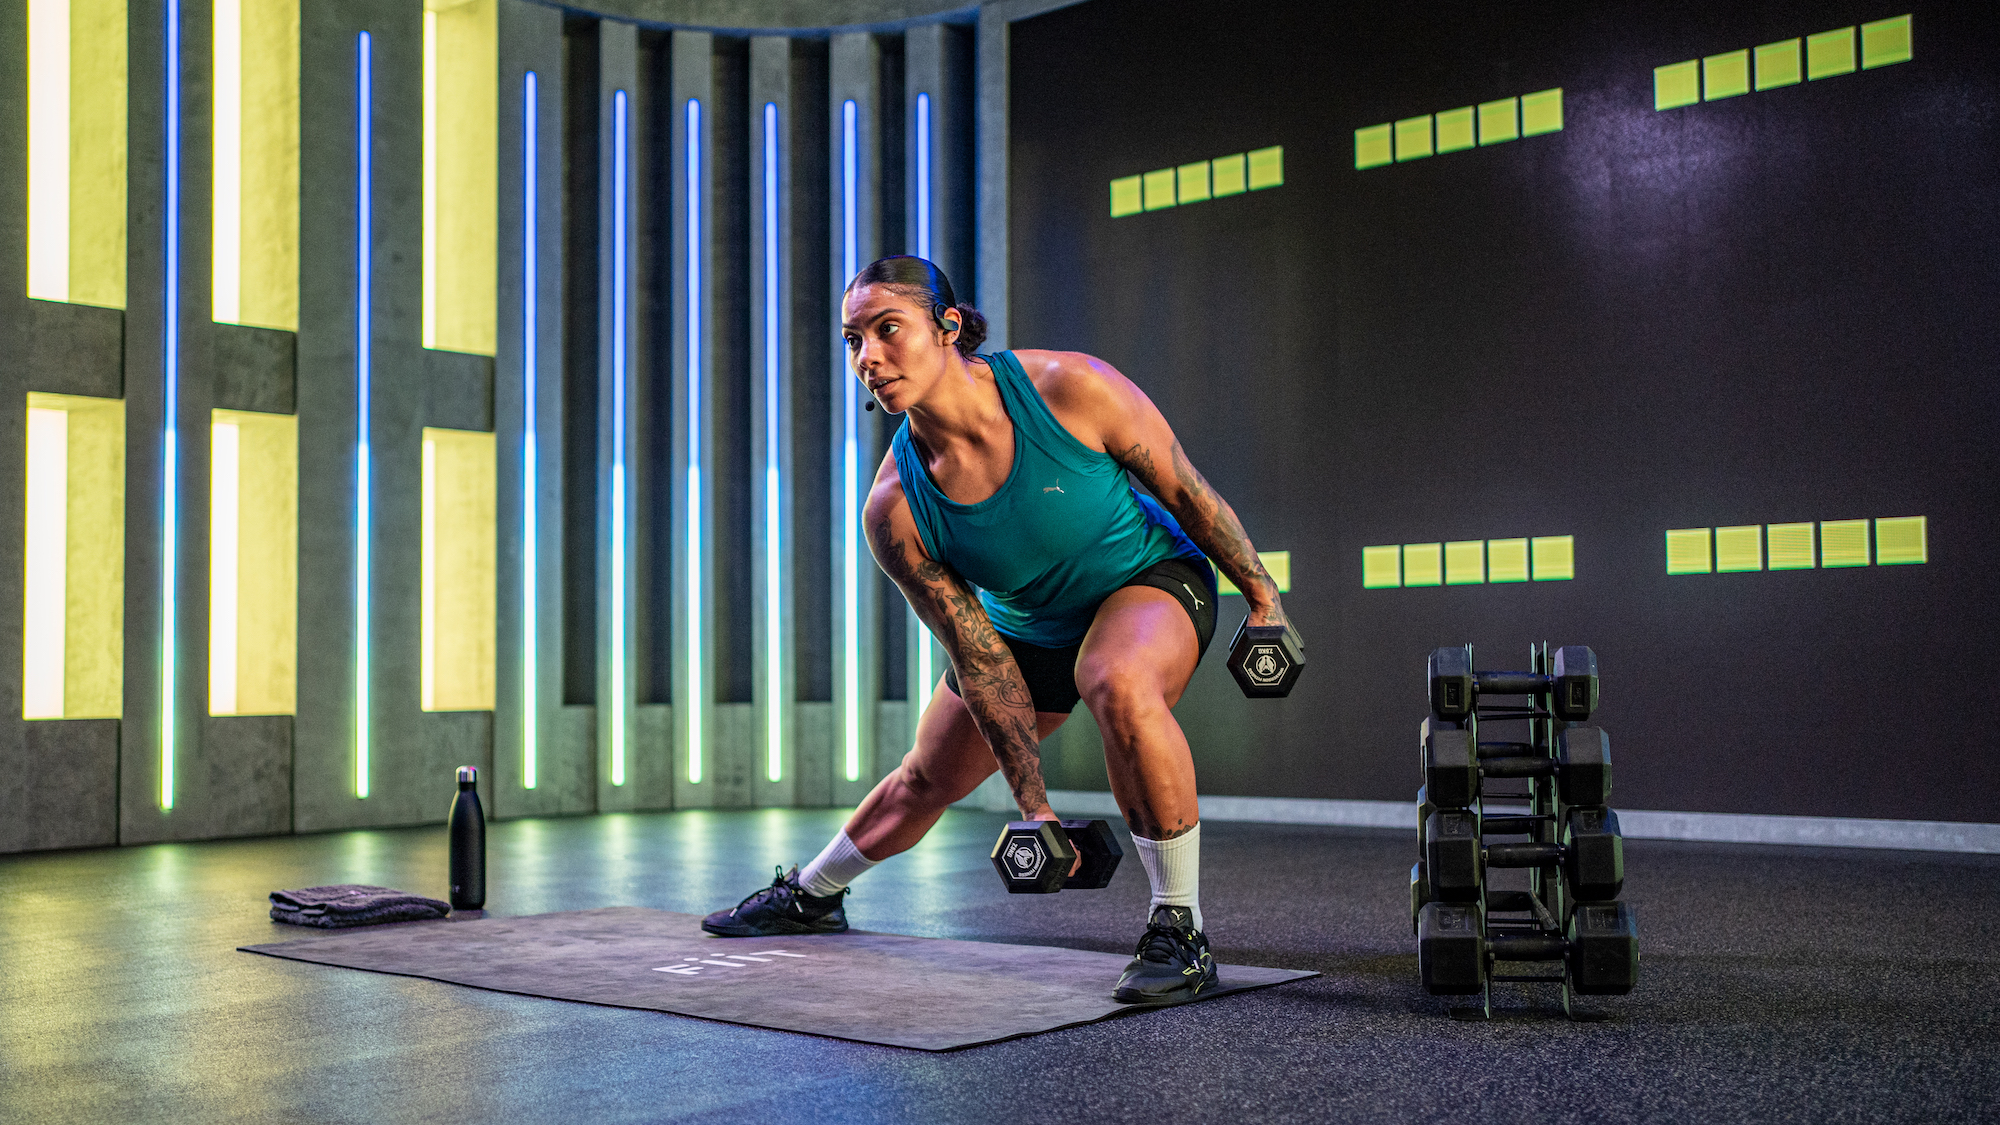 Fiit trainer and Olympic weightlifter Chloe Whylie demonstrating a side lunge with dumbbells